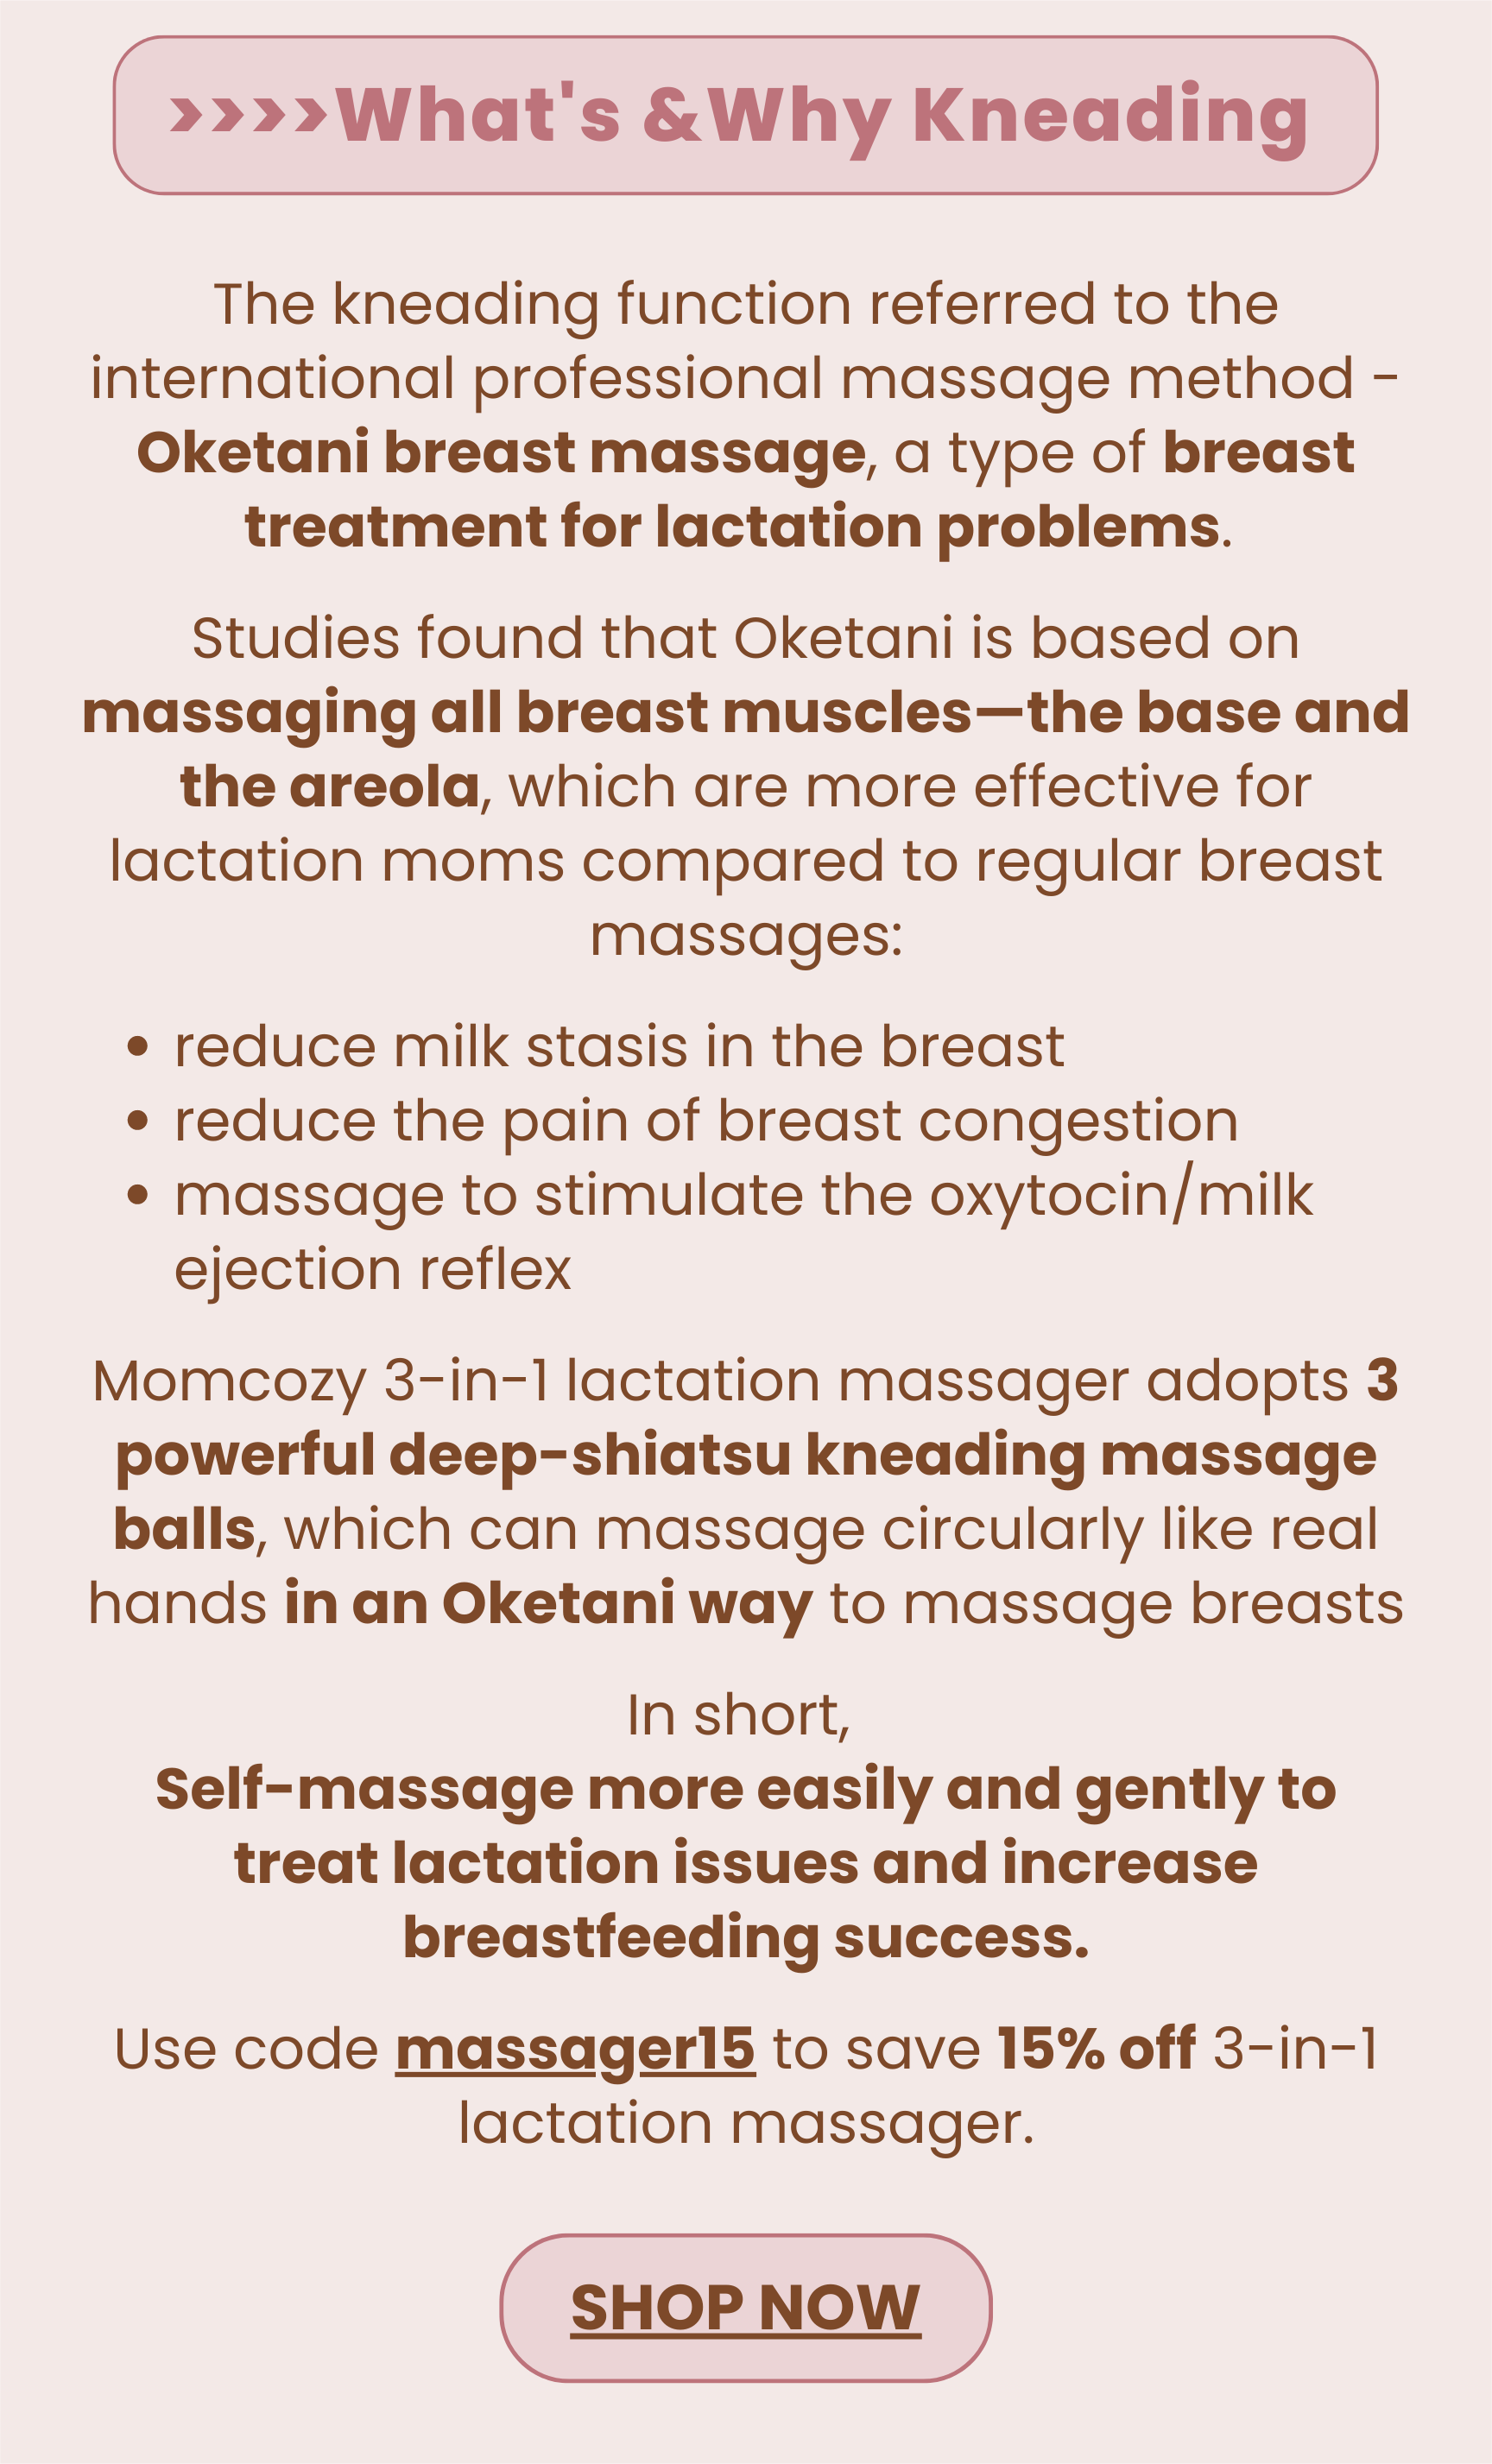 Put Mom's Mind At Ease, milk, The rotary balls massage function referred  to the international professional massage method, Momcozy lactation massager  adopts 3 powerful deep-shiatsu, By Momcozy